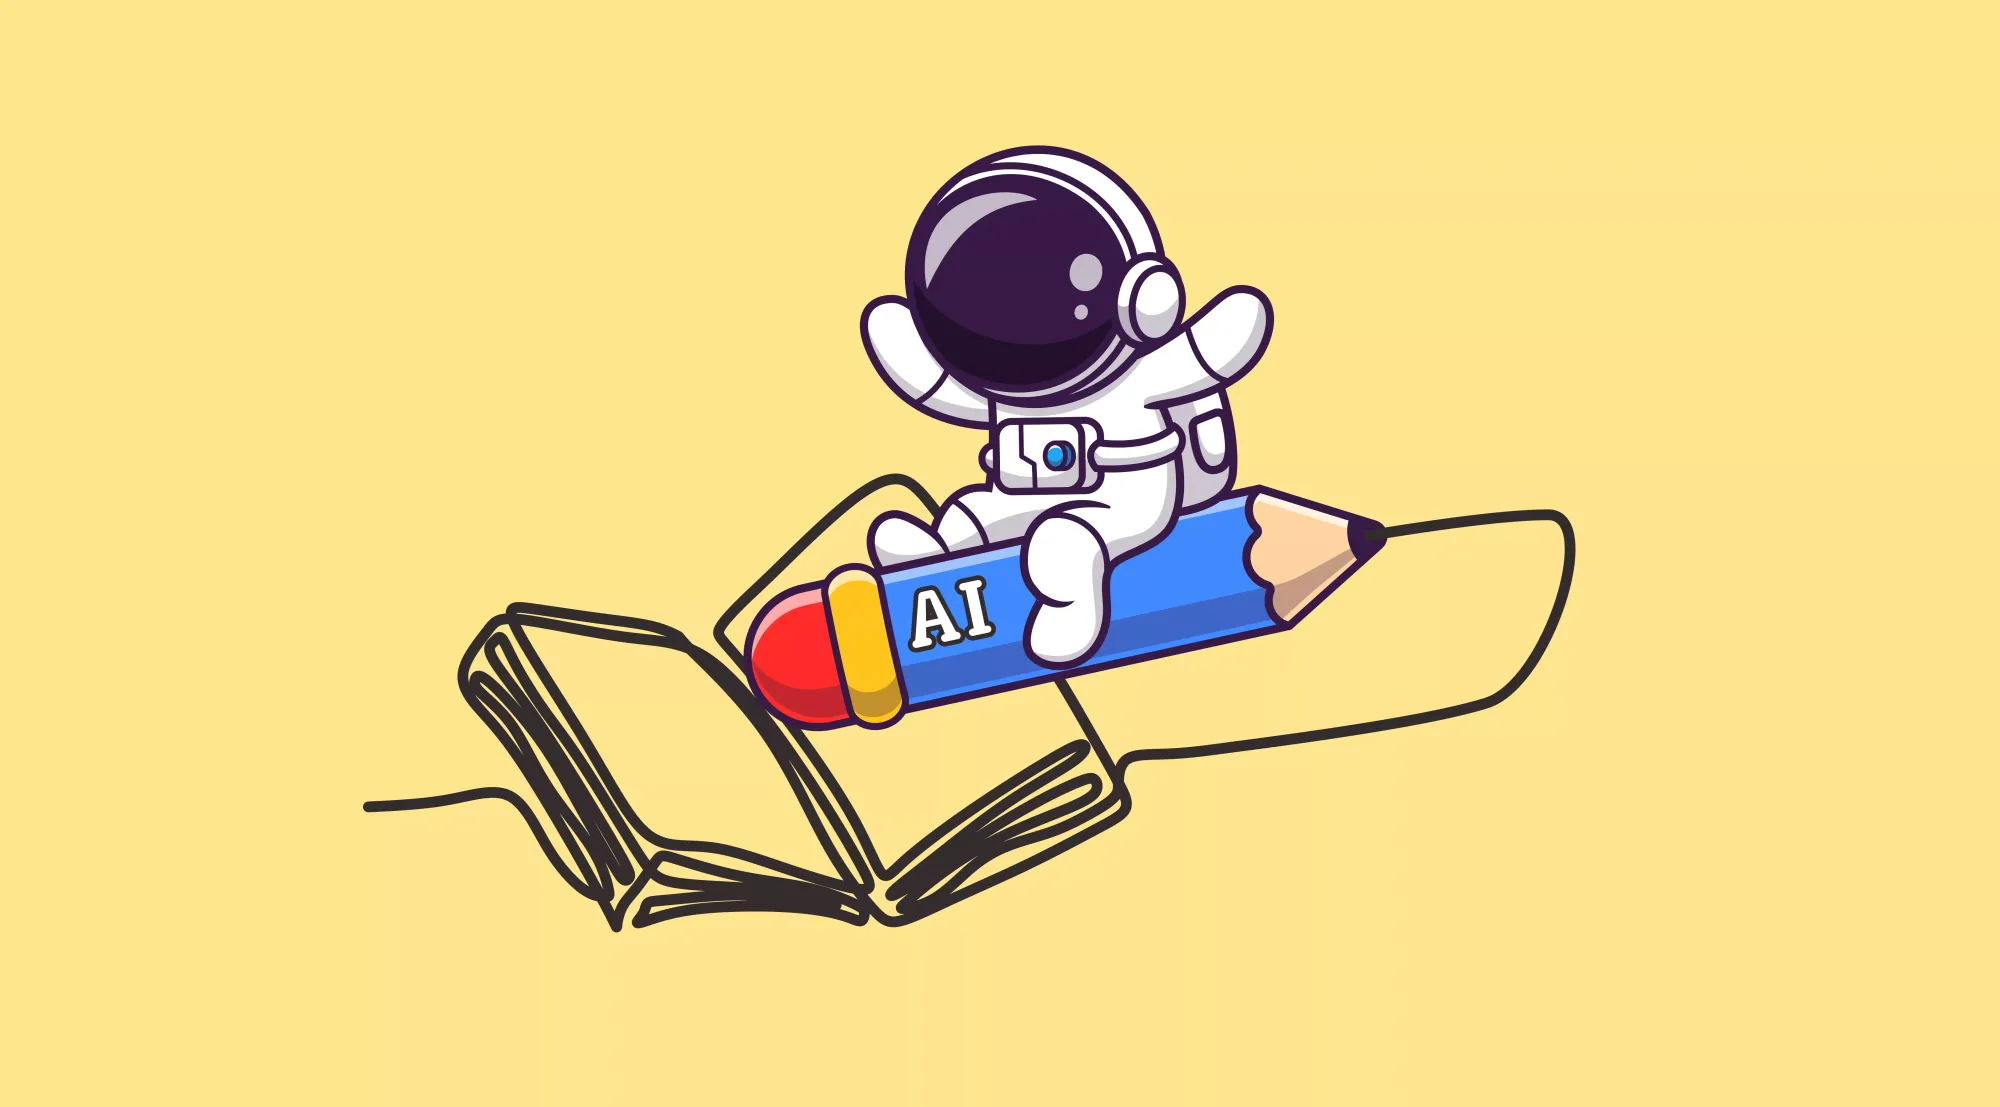 Astronaut riding on a large pencil. The pencil has drawn a book using a continuous line. The pencil is labelled with "AI".